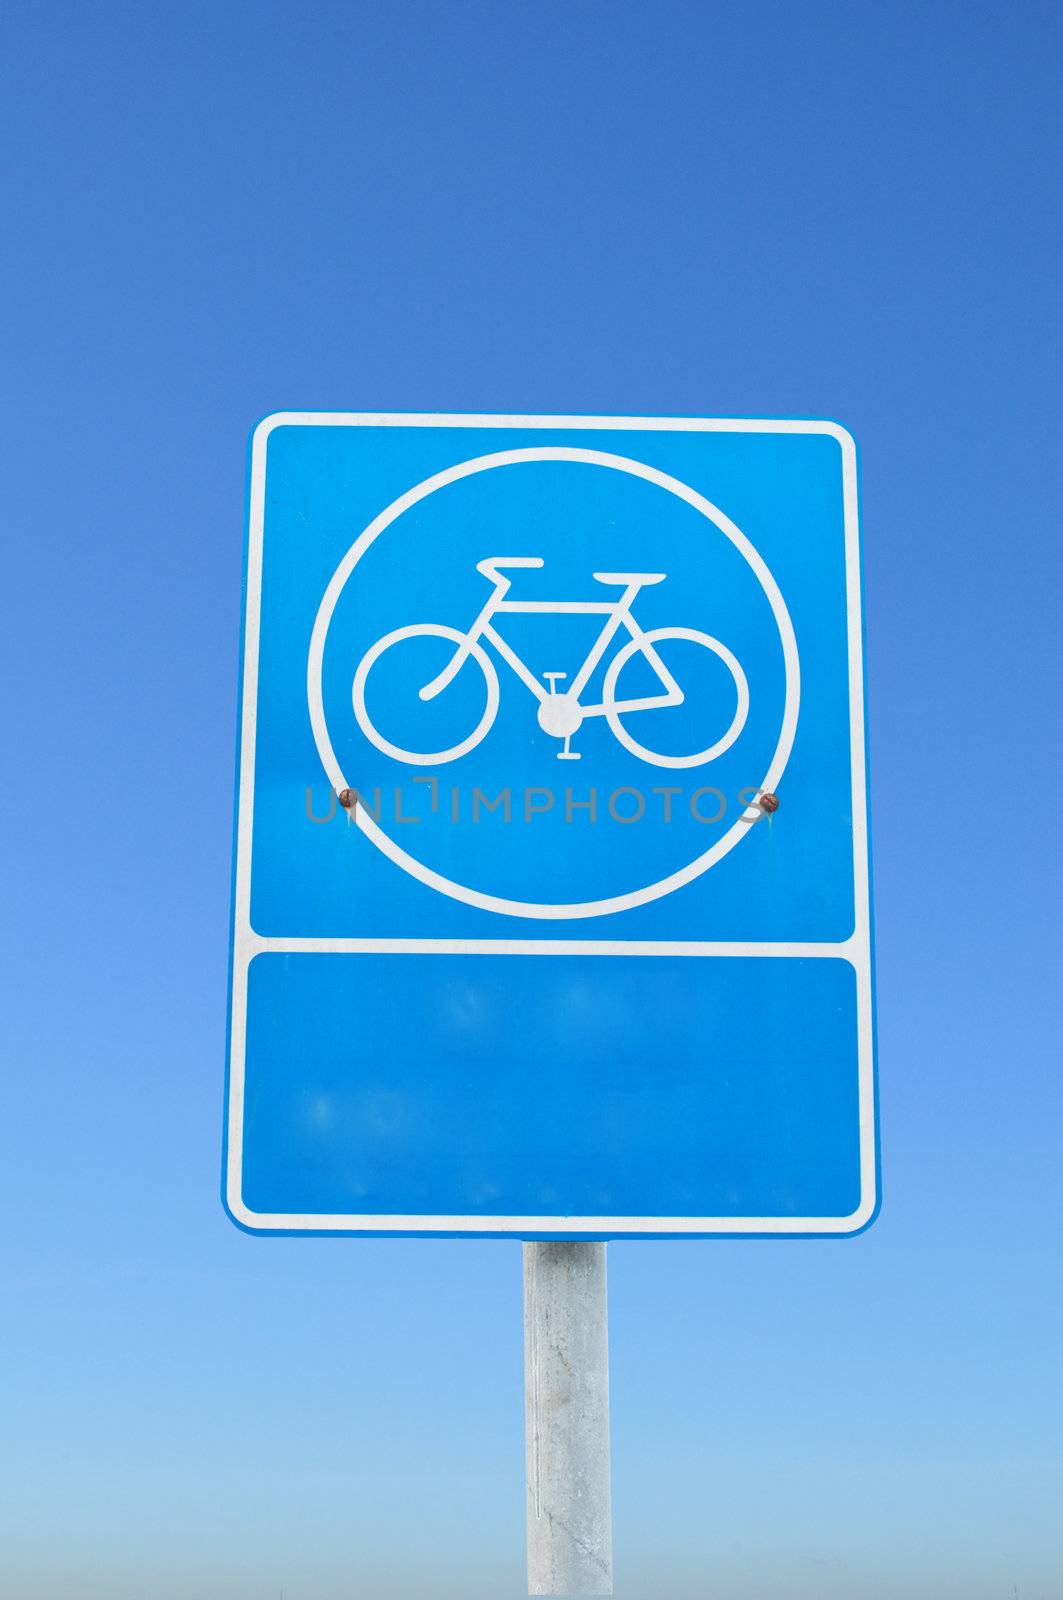 Blue parking bicycle sign on blue sky background.